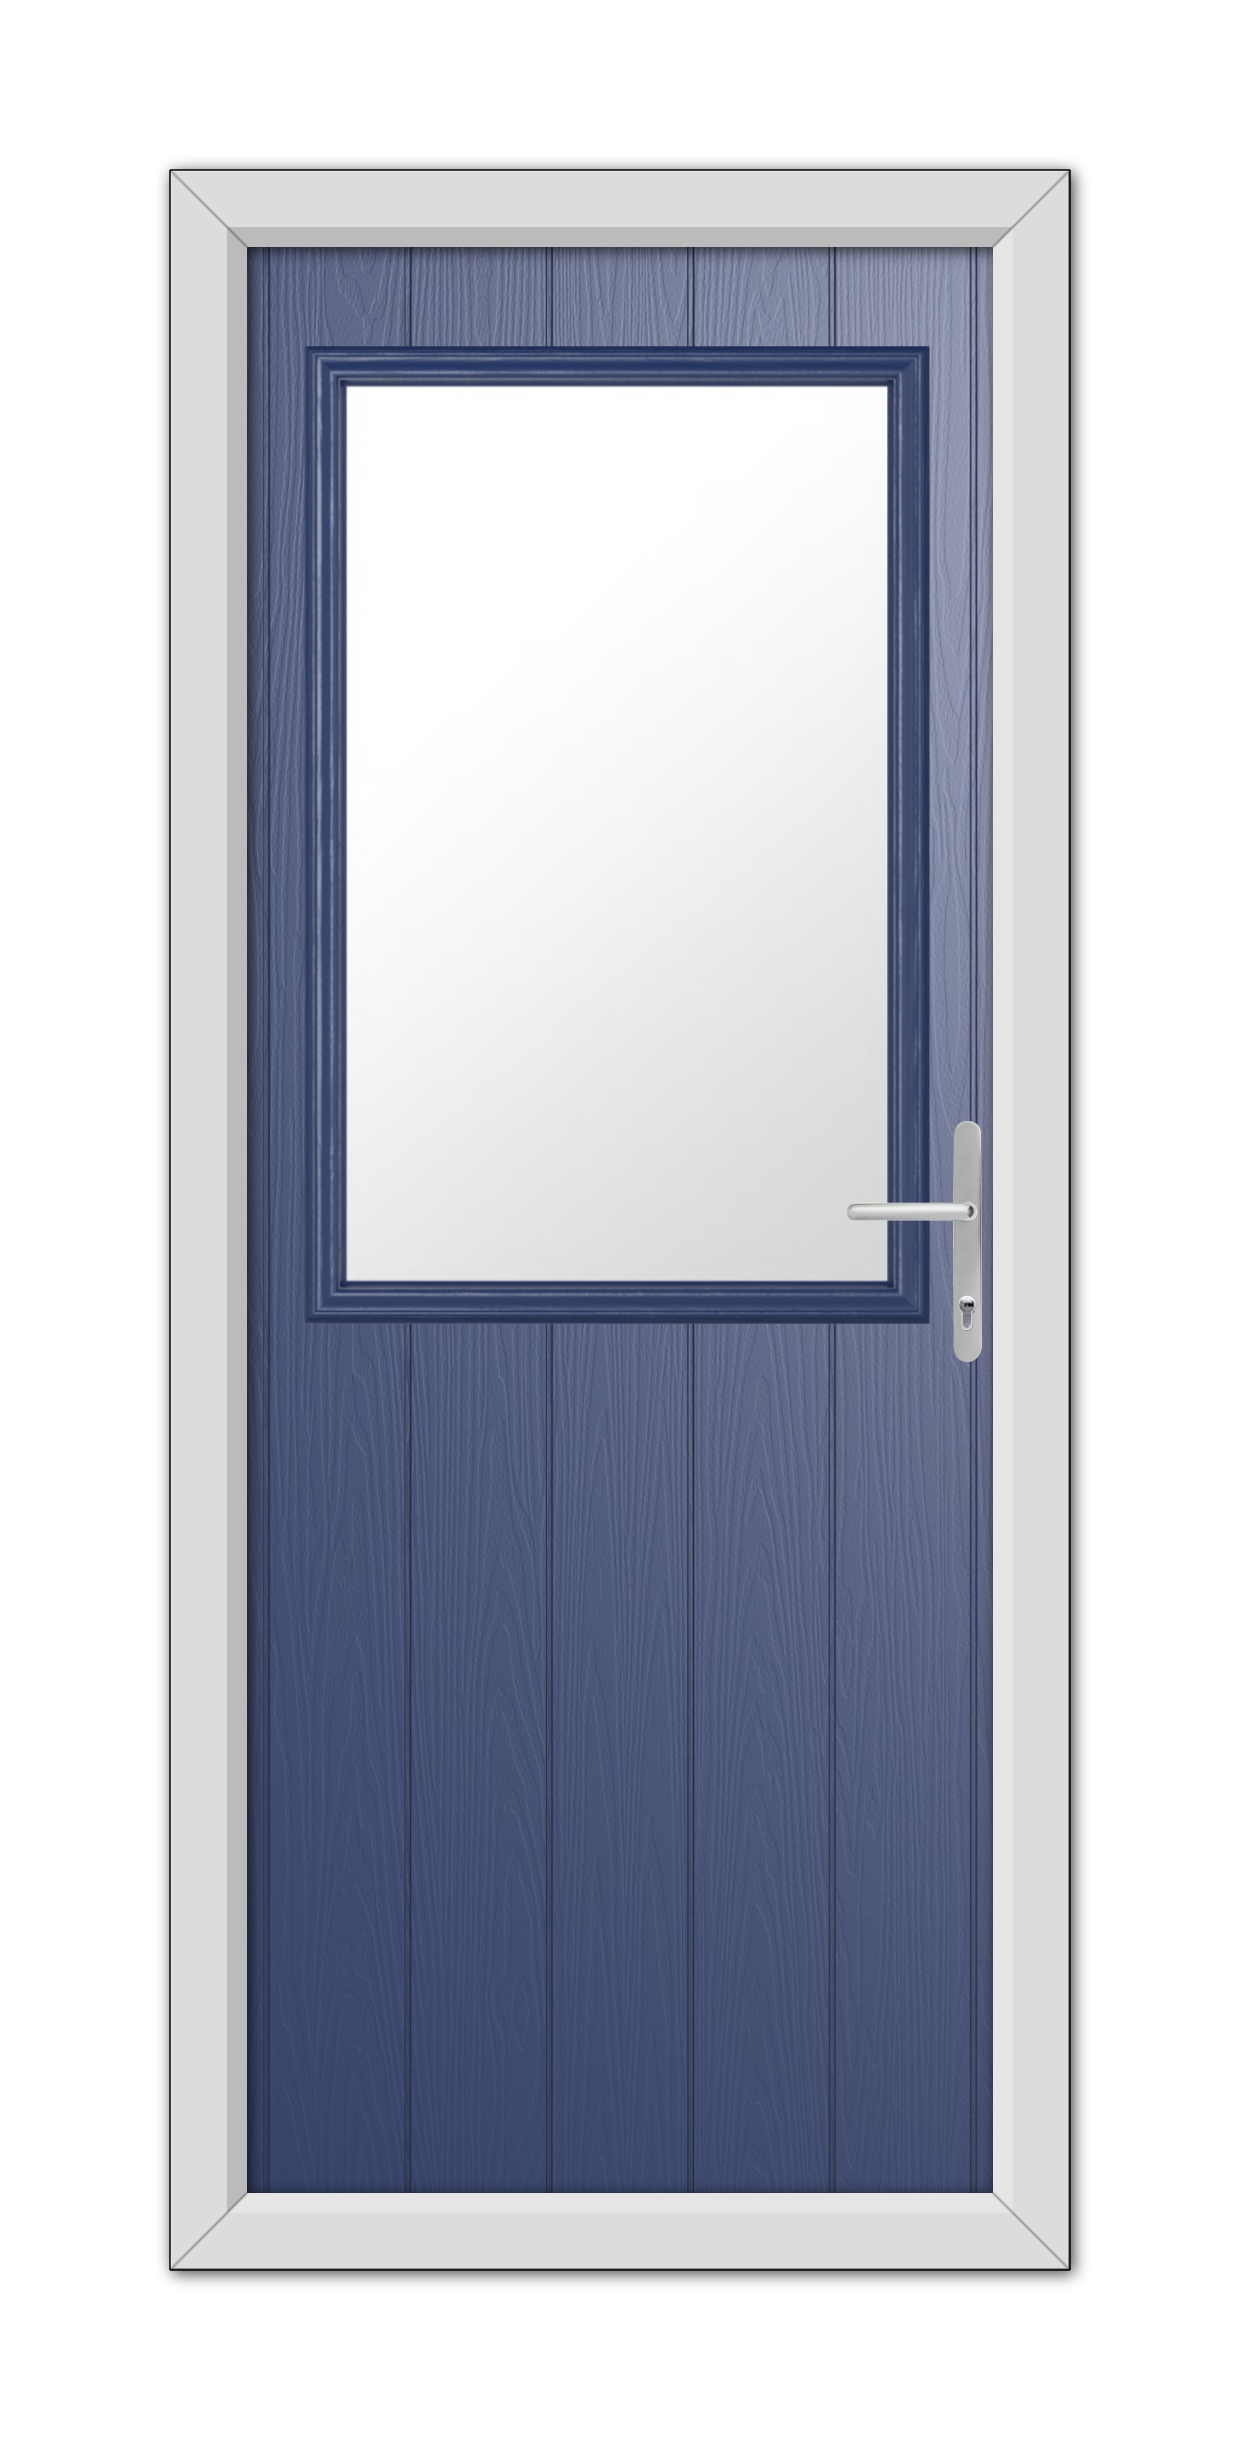 A Blue Clifton Composite Door 48mm Timber Core with a white frame and a square glass window, featuring a modern handle on the right side.